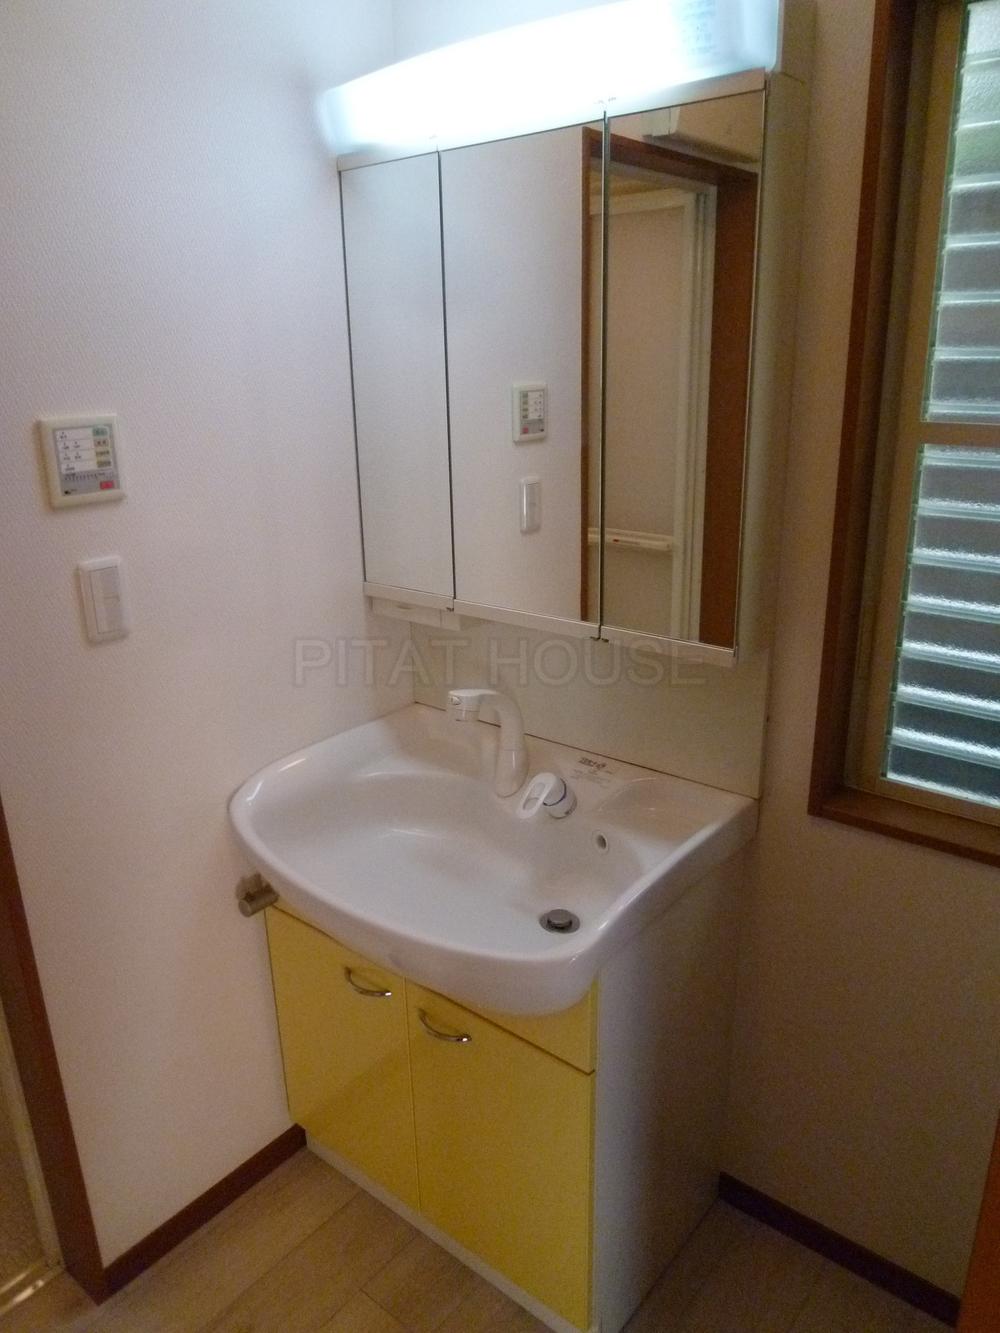 Wash basin, toilet.  ◆ Vanity is vanity with easy-to-use three-sided mirror.